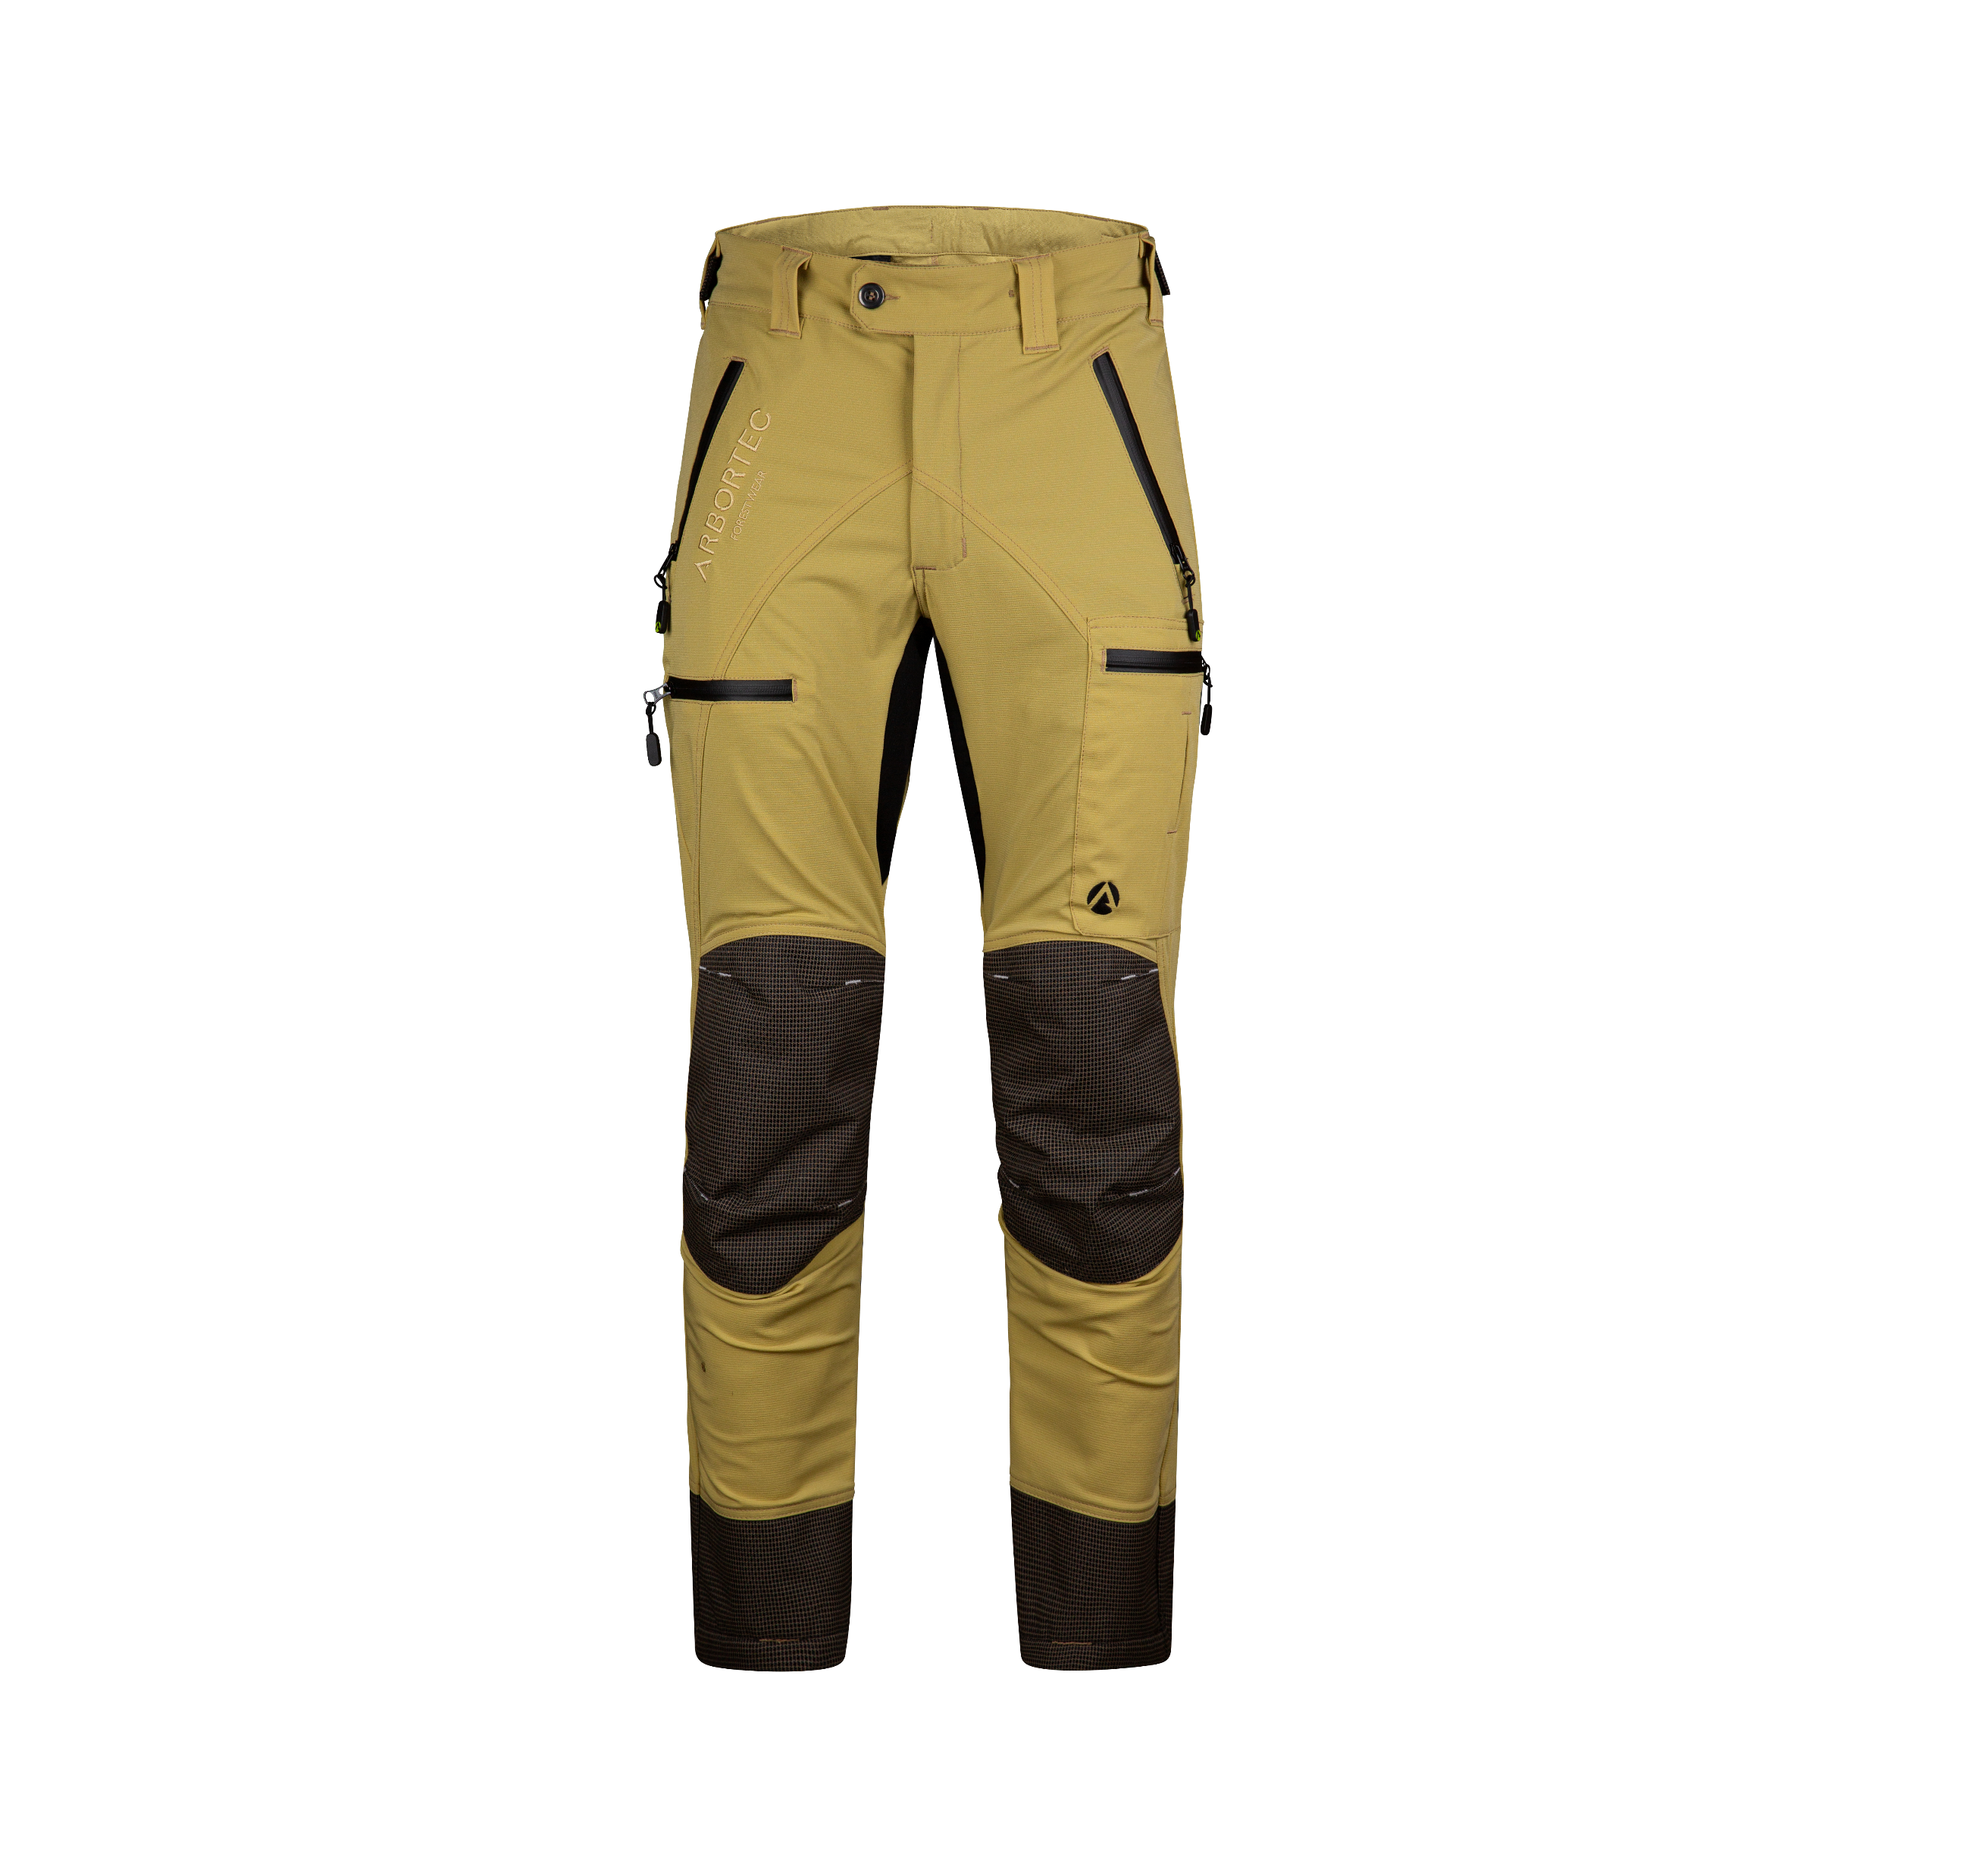 AT4160 Breatheflex Pro Trousers Non-Protective - Beige